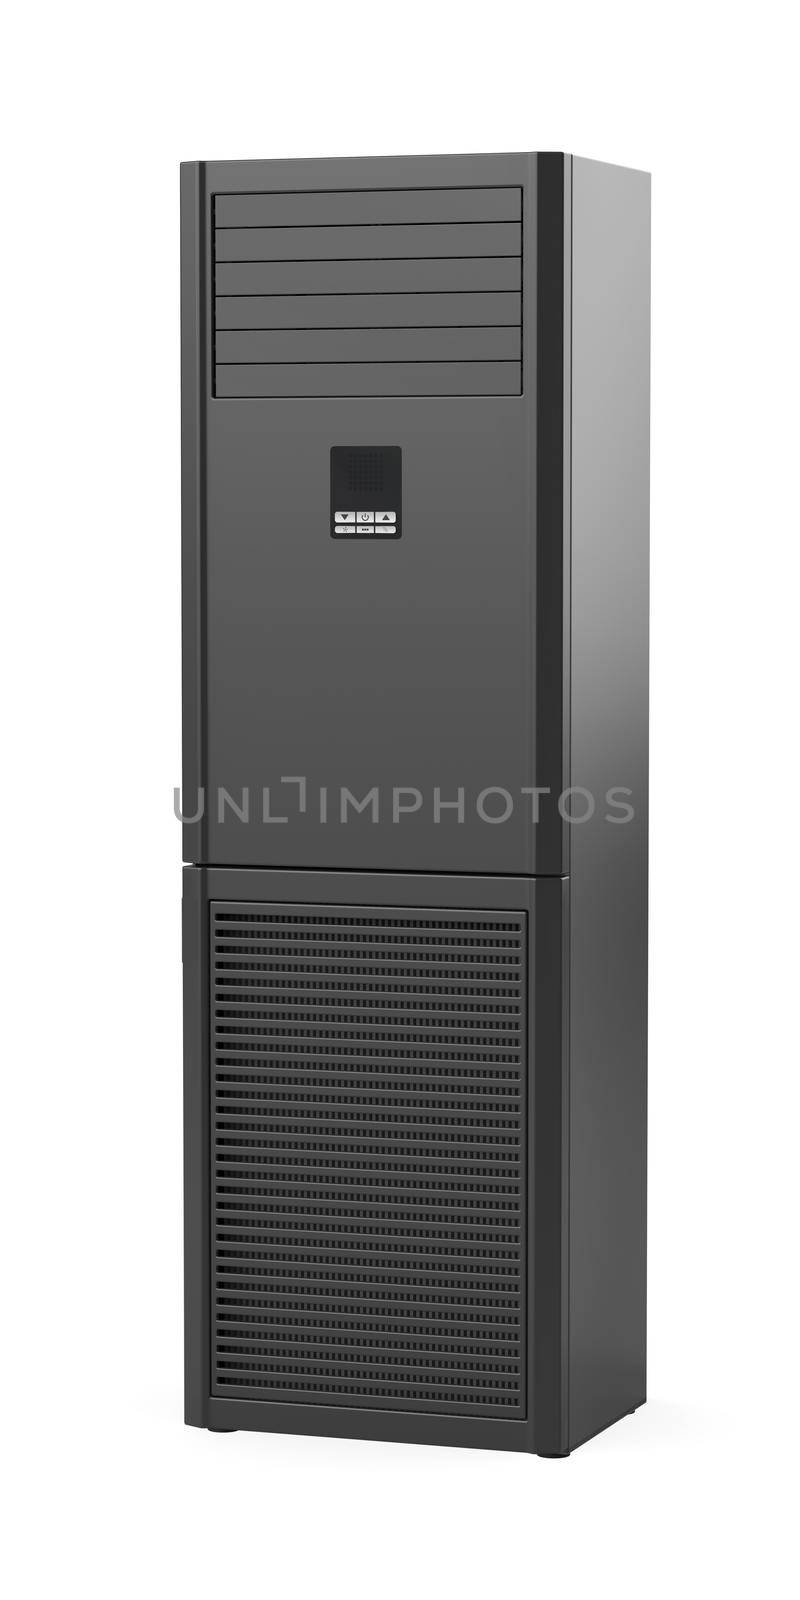 Black floor standing air conditioner on white background